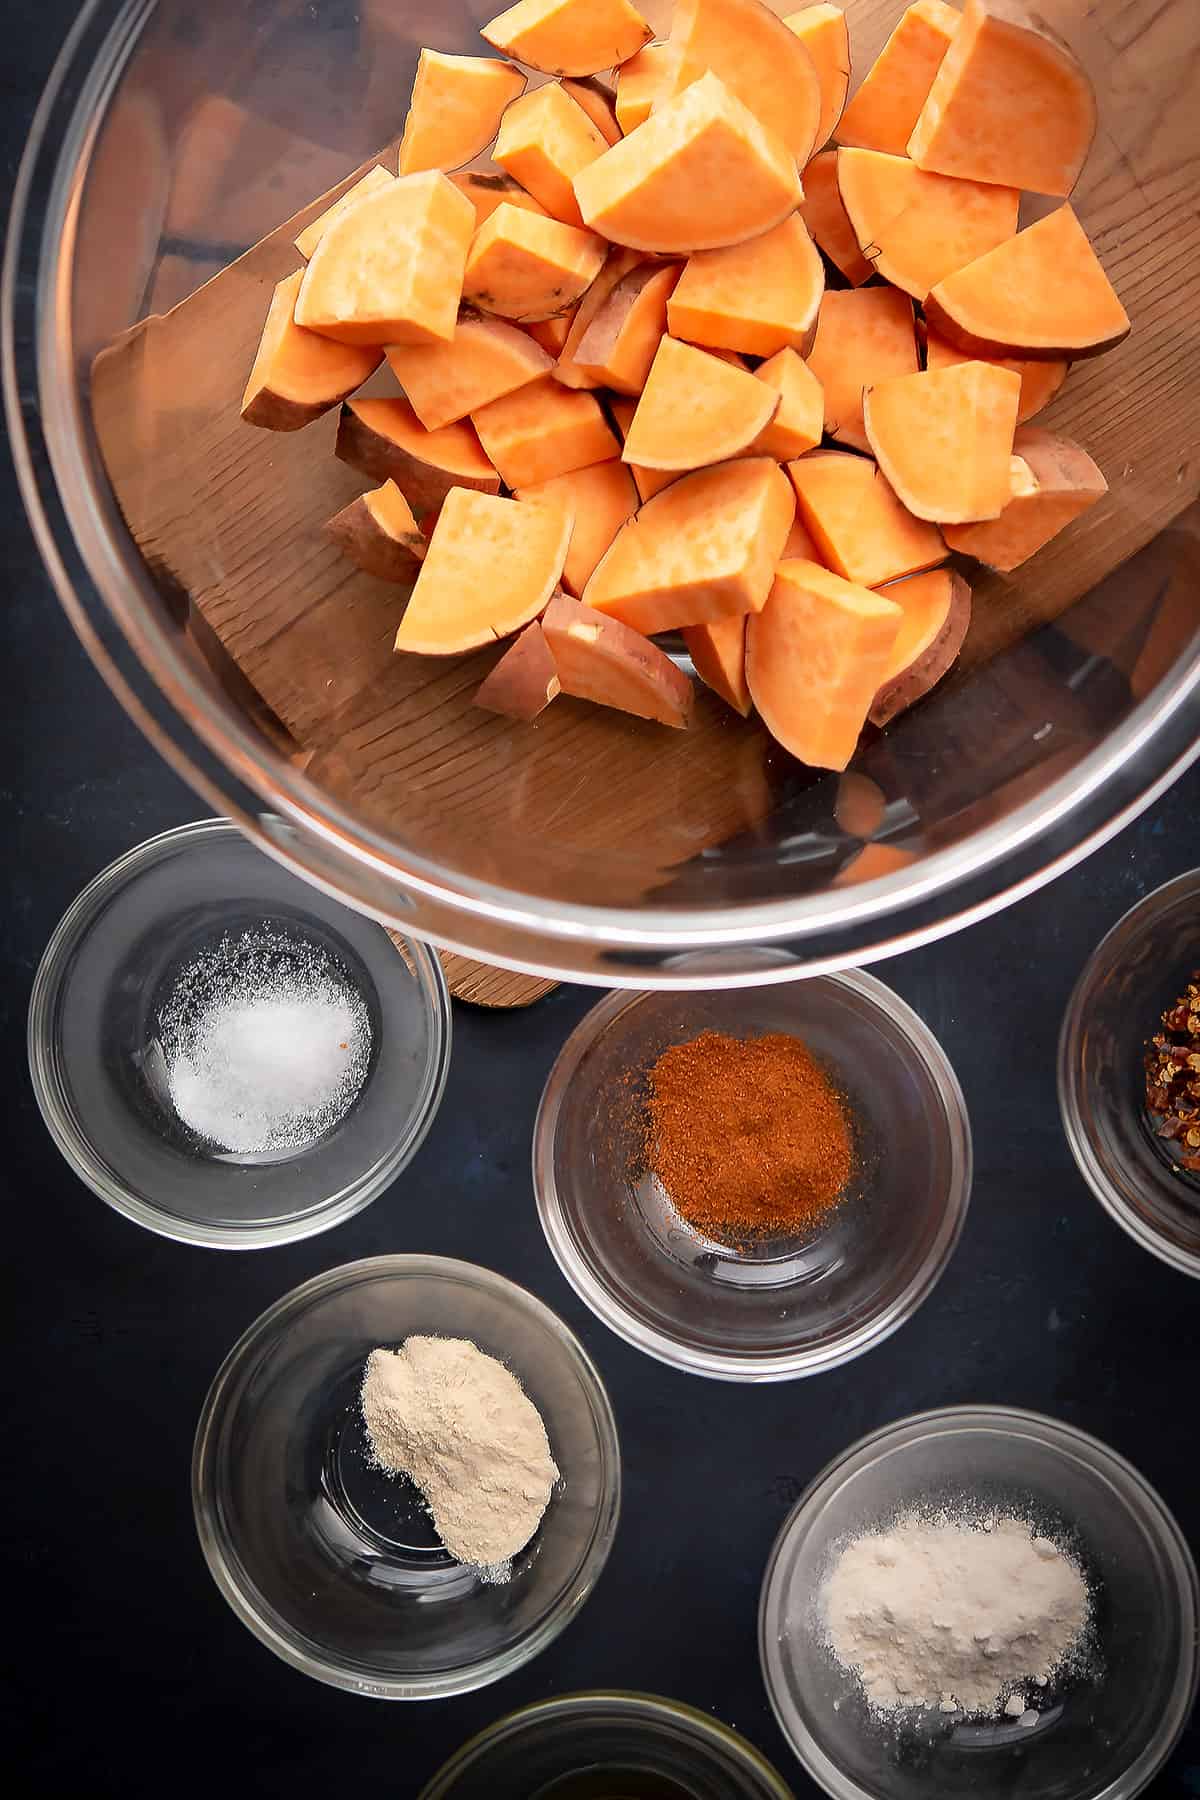 deiced sweet potato, and its spicy ingredients are placed in a bowl.